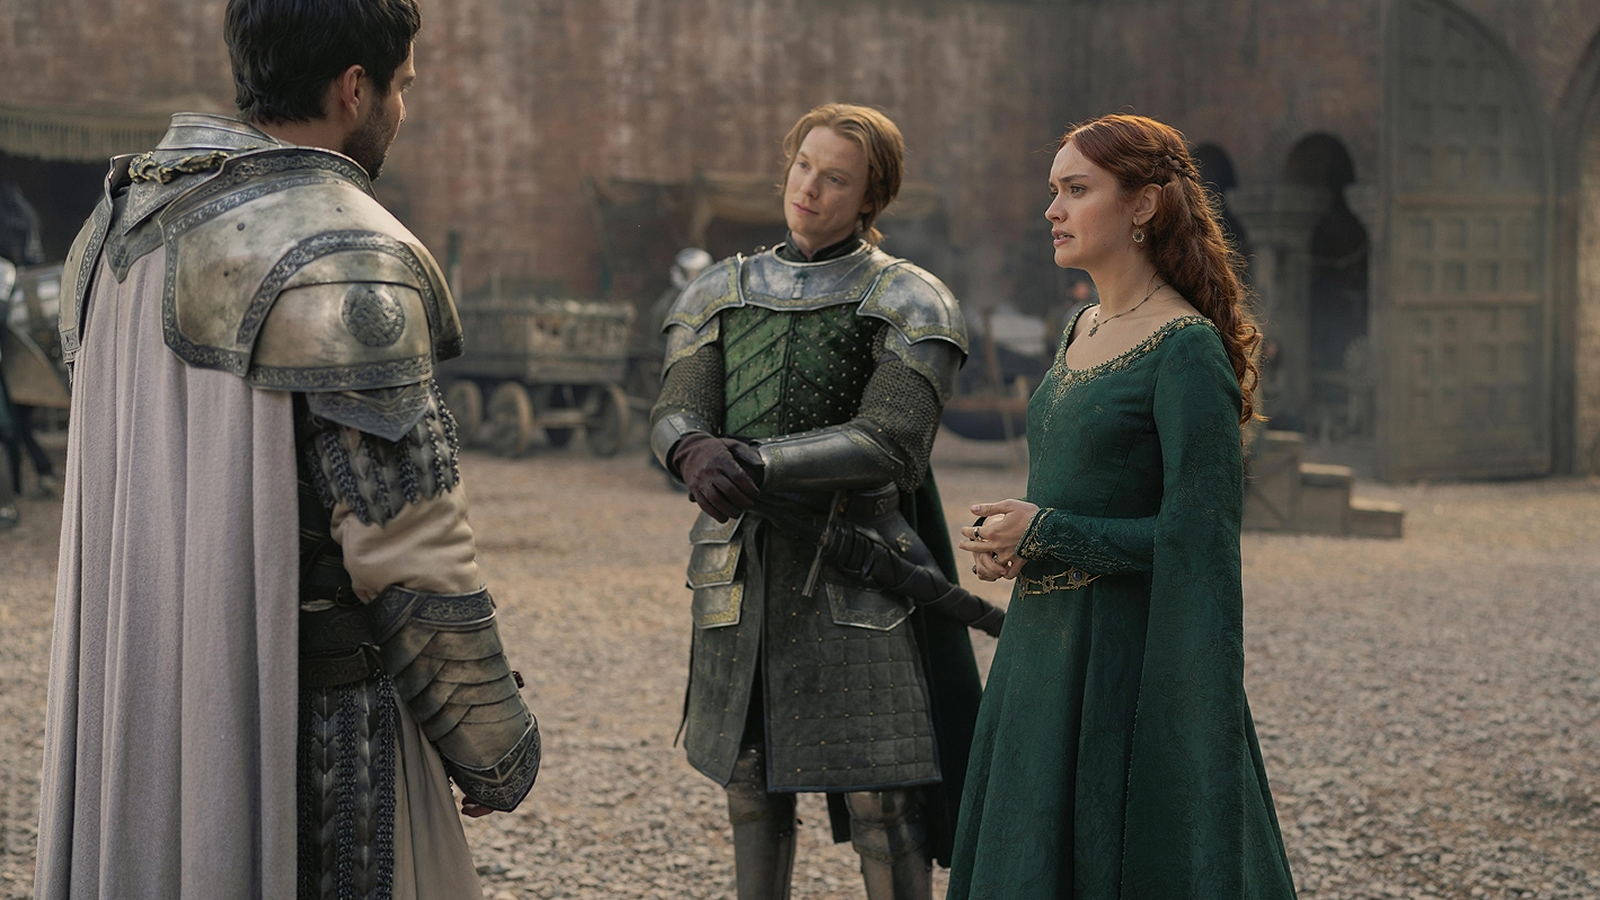 Ser Criston Cole, Ser Gwayne Hightower, and Queen Dowager Alicent Hightower in House of the Dragon Season 2, Episode 3